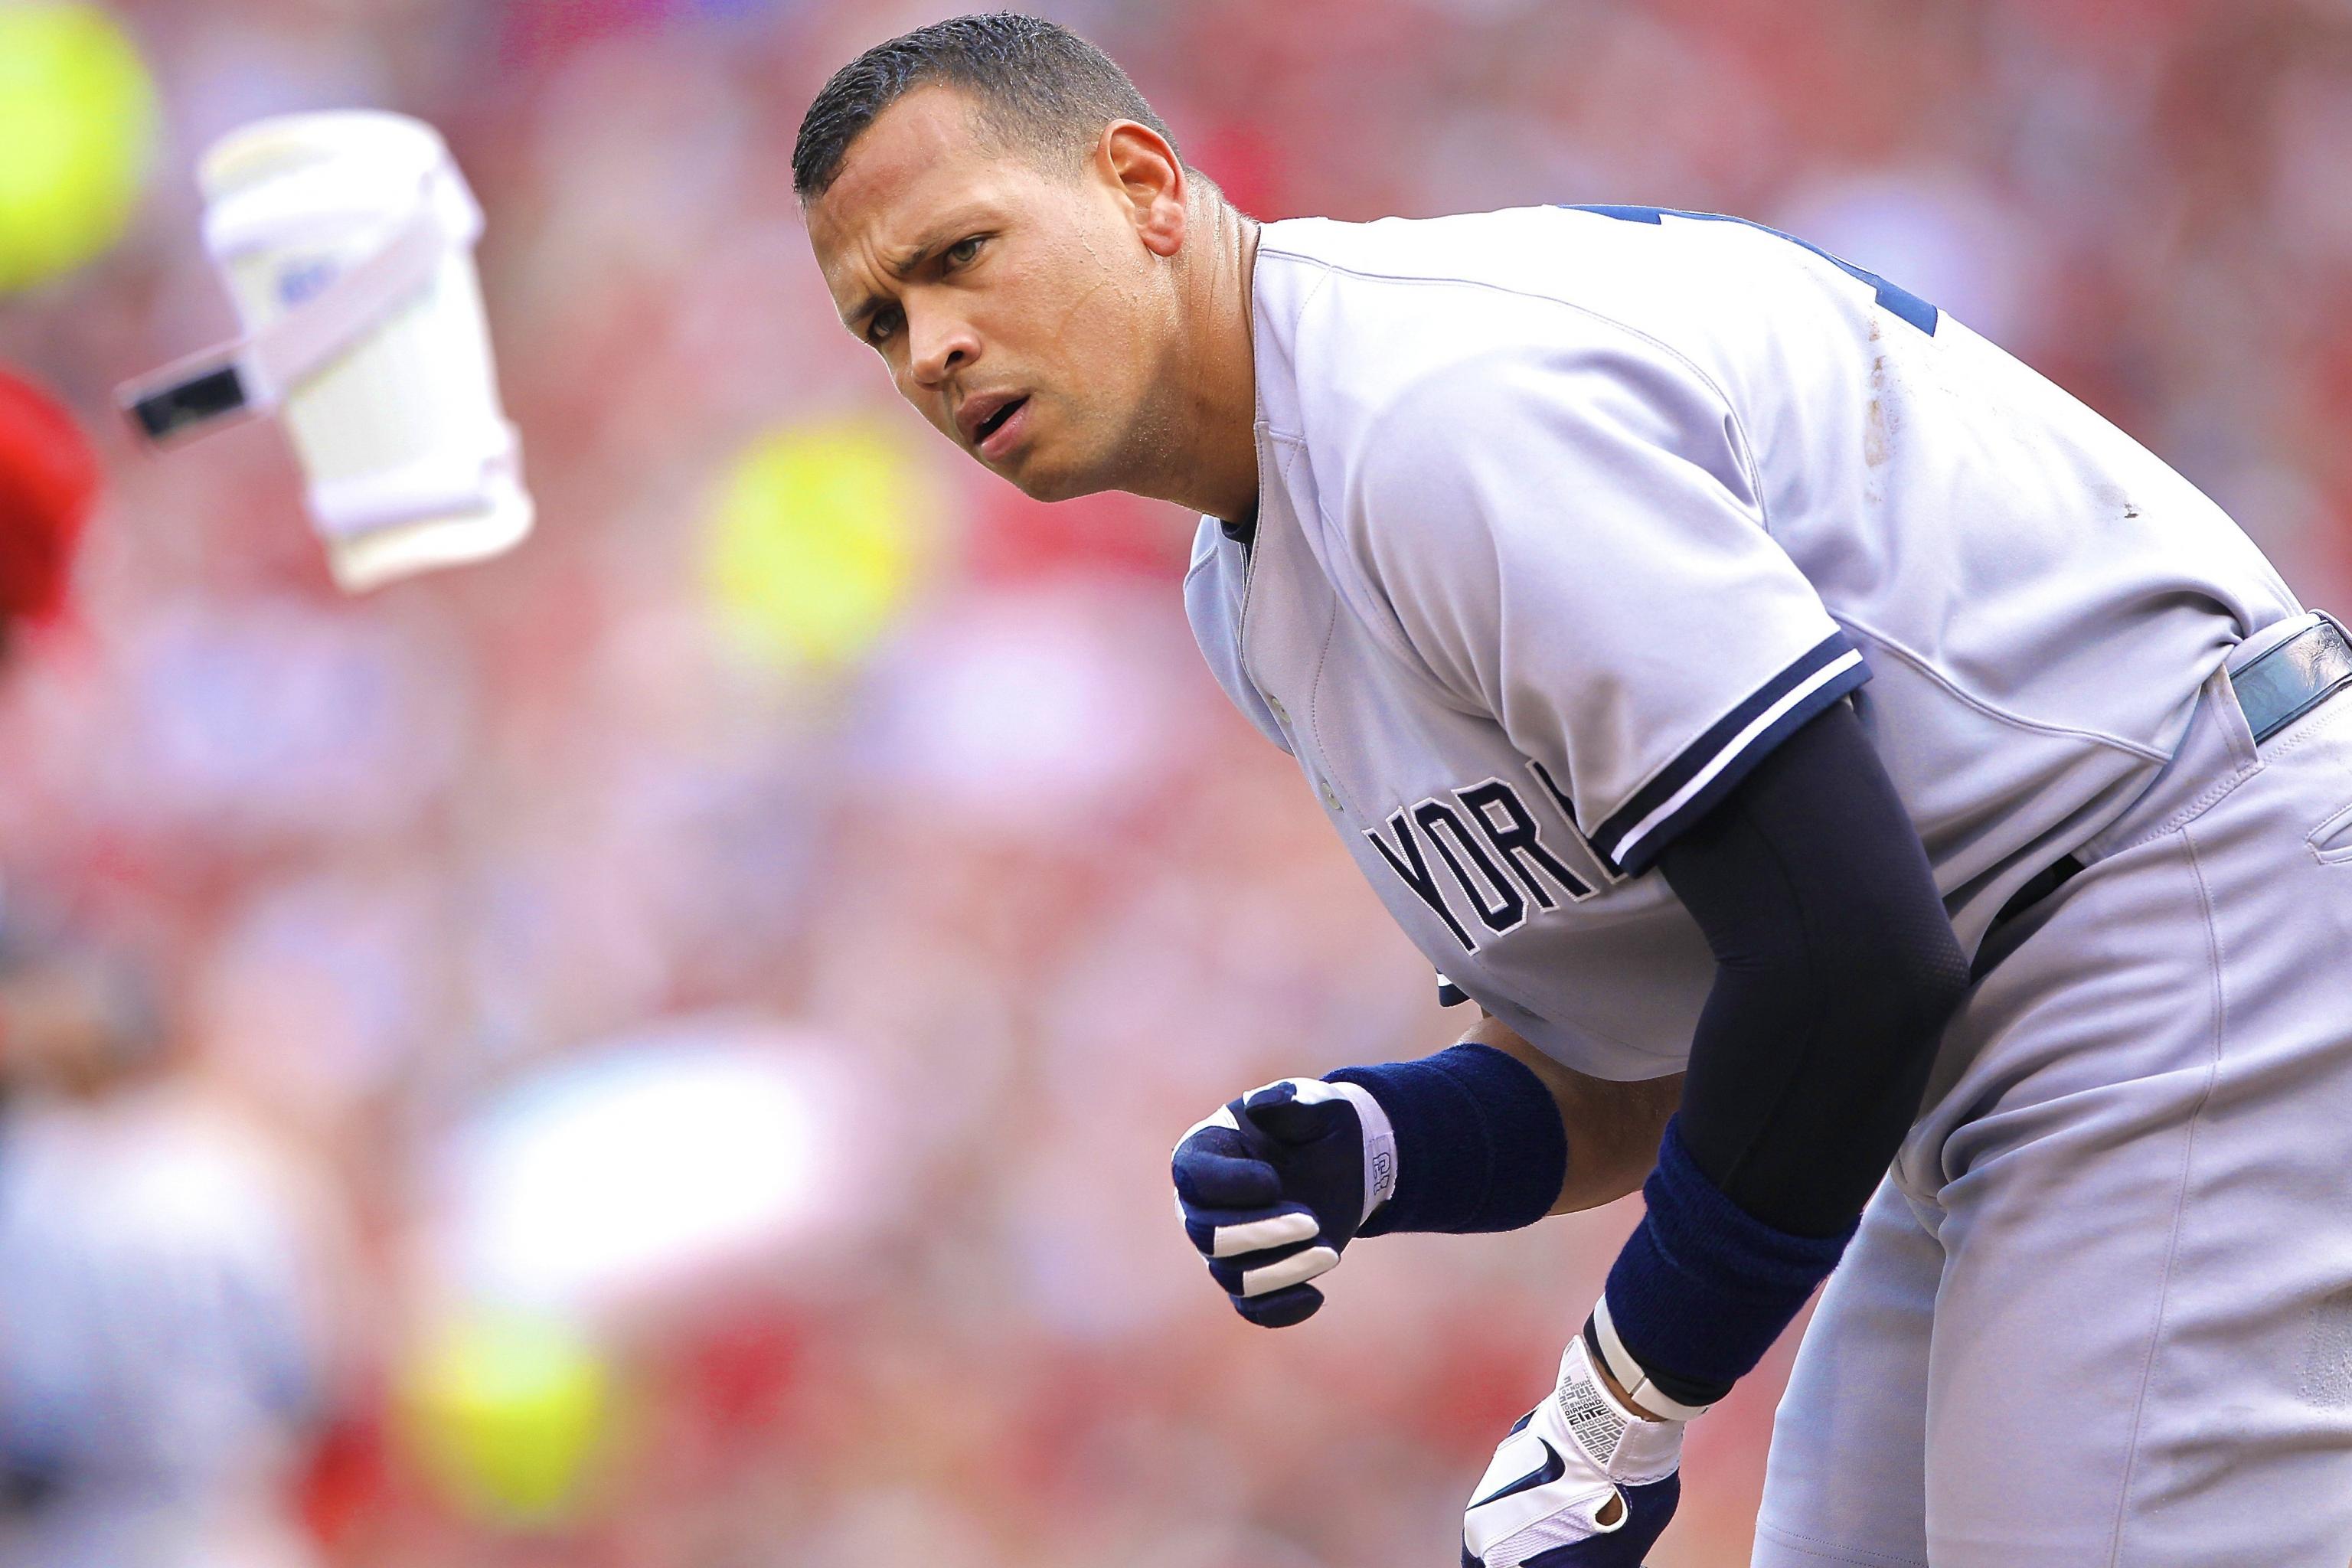 Eventful day for A-Rod as Rangers win opener